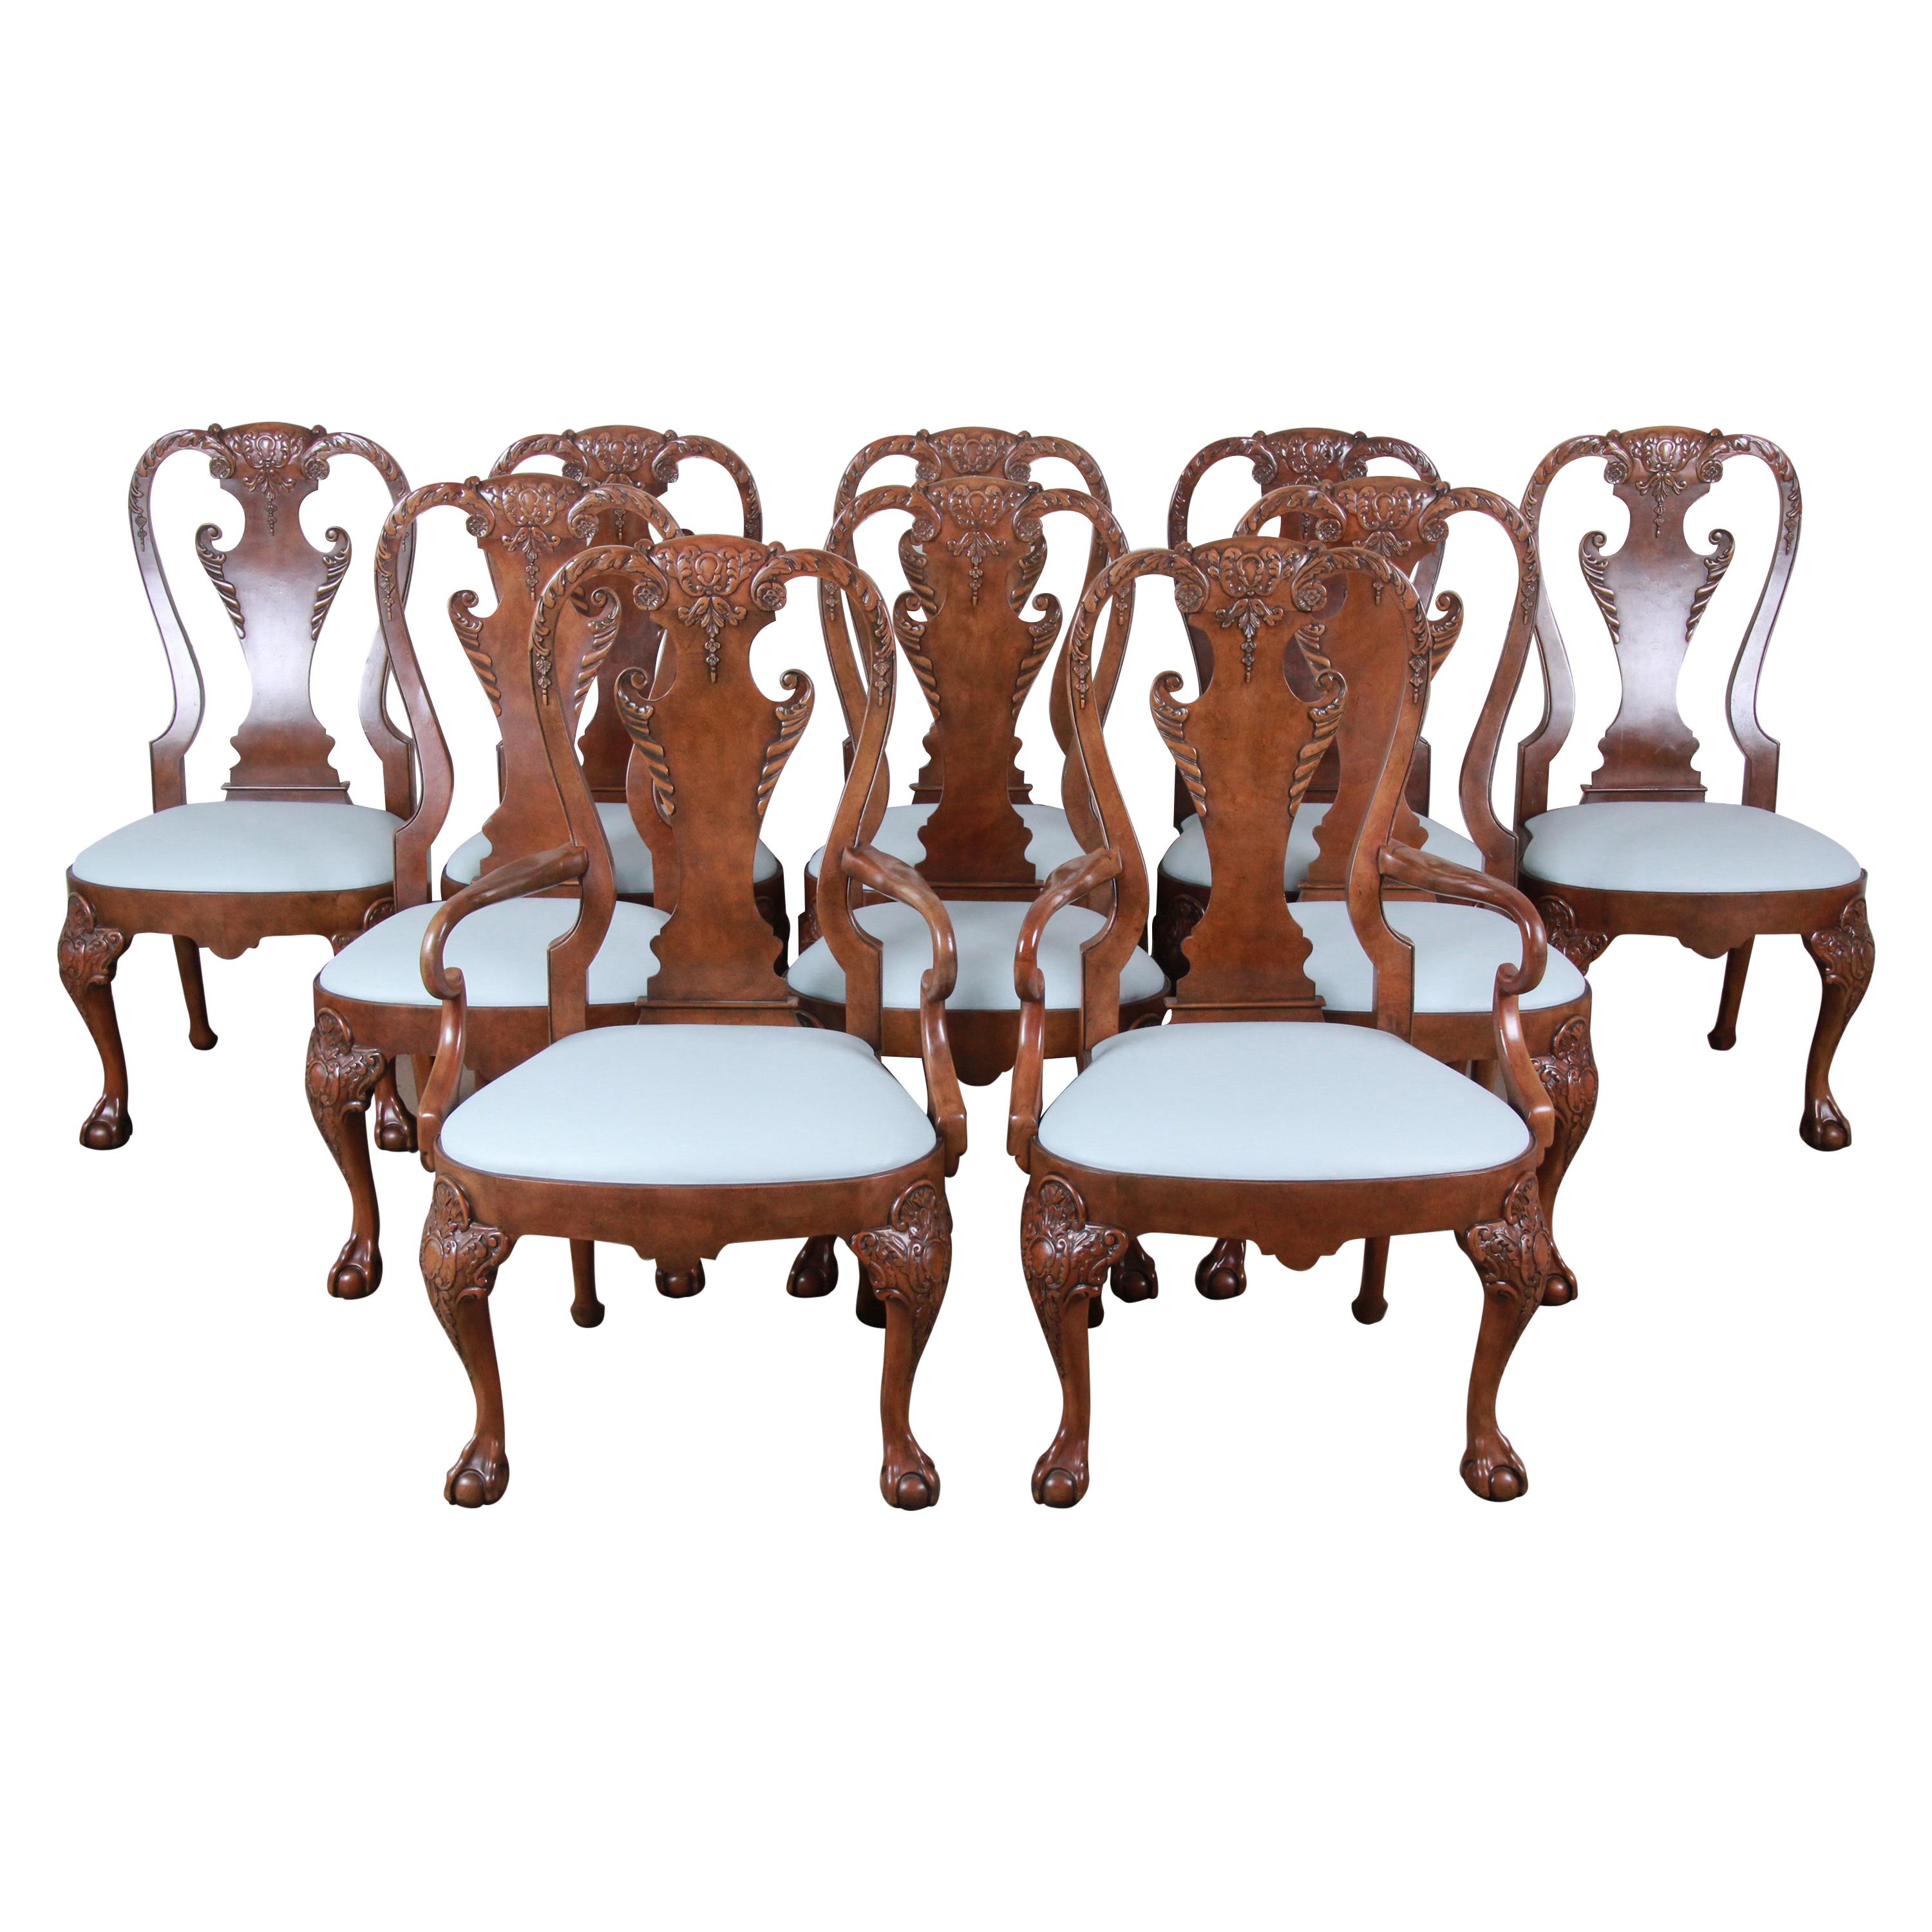 Baker Furniture Stately Homes Chippendale Burled Walnut Dining Chairs, Set of 10